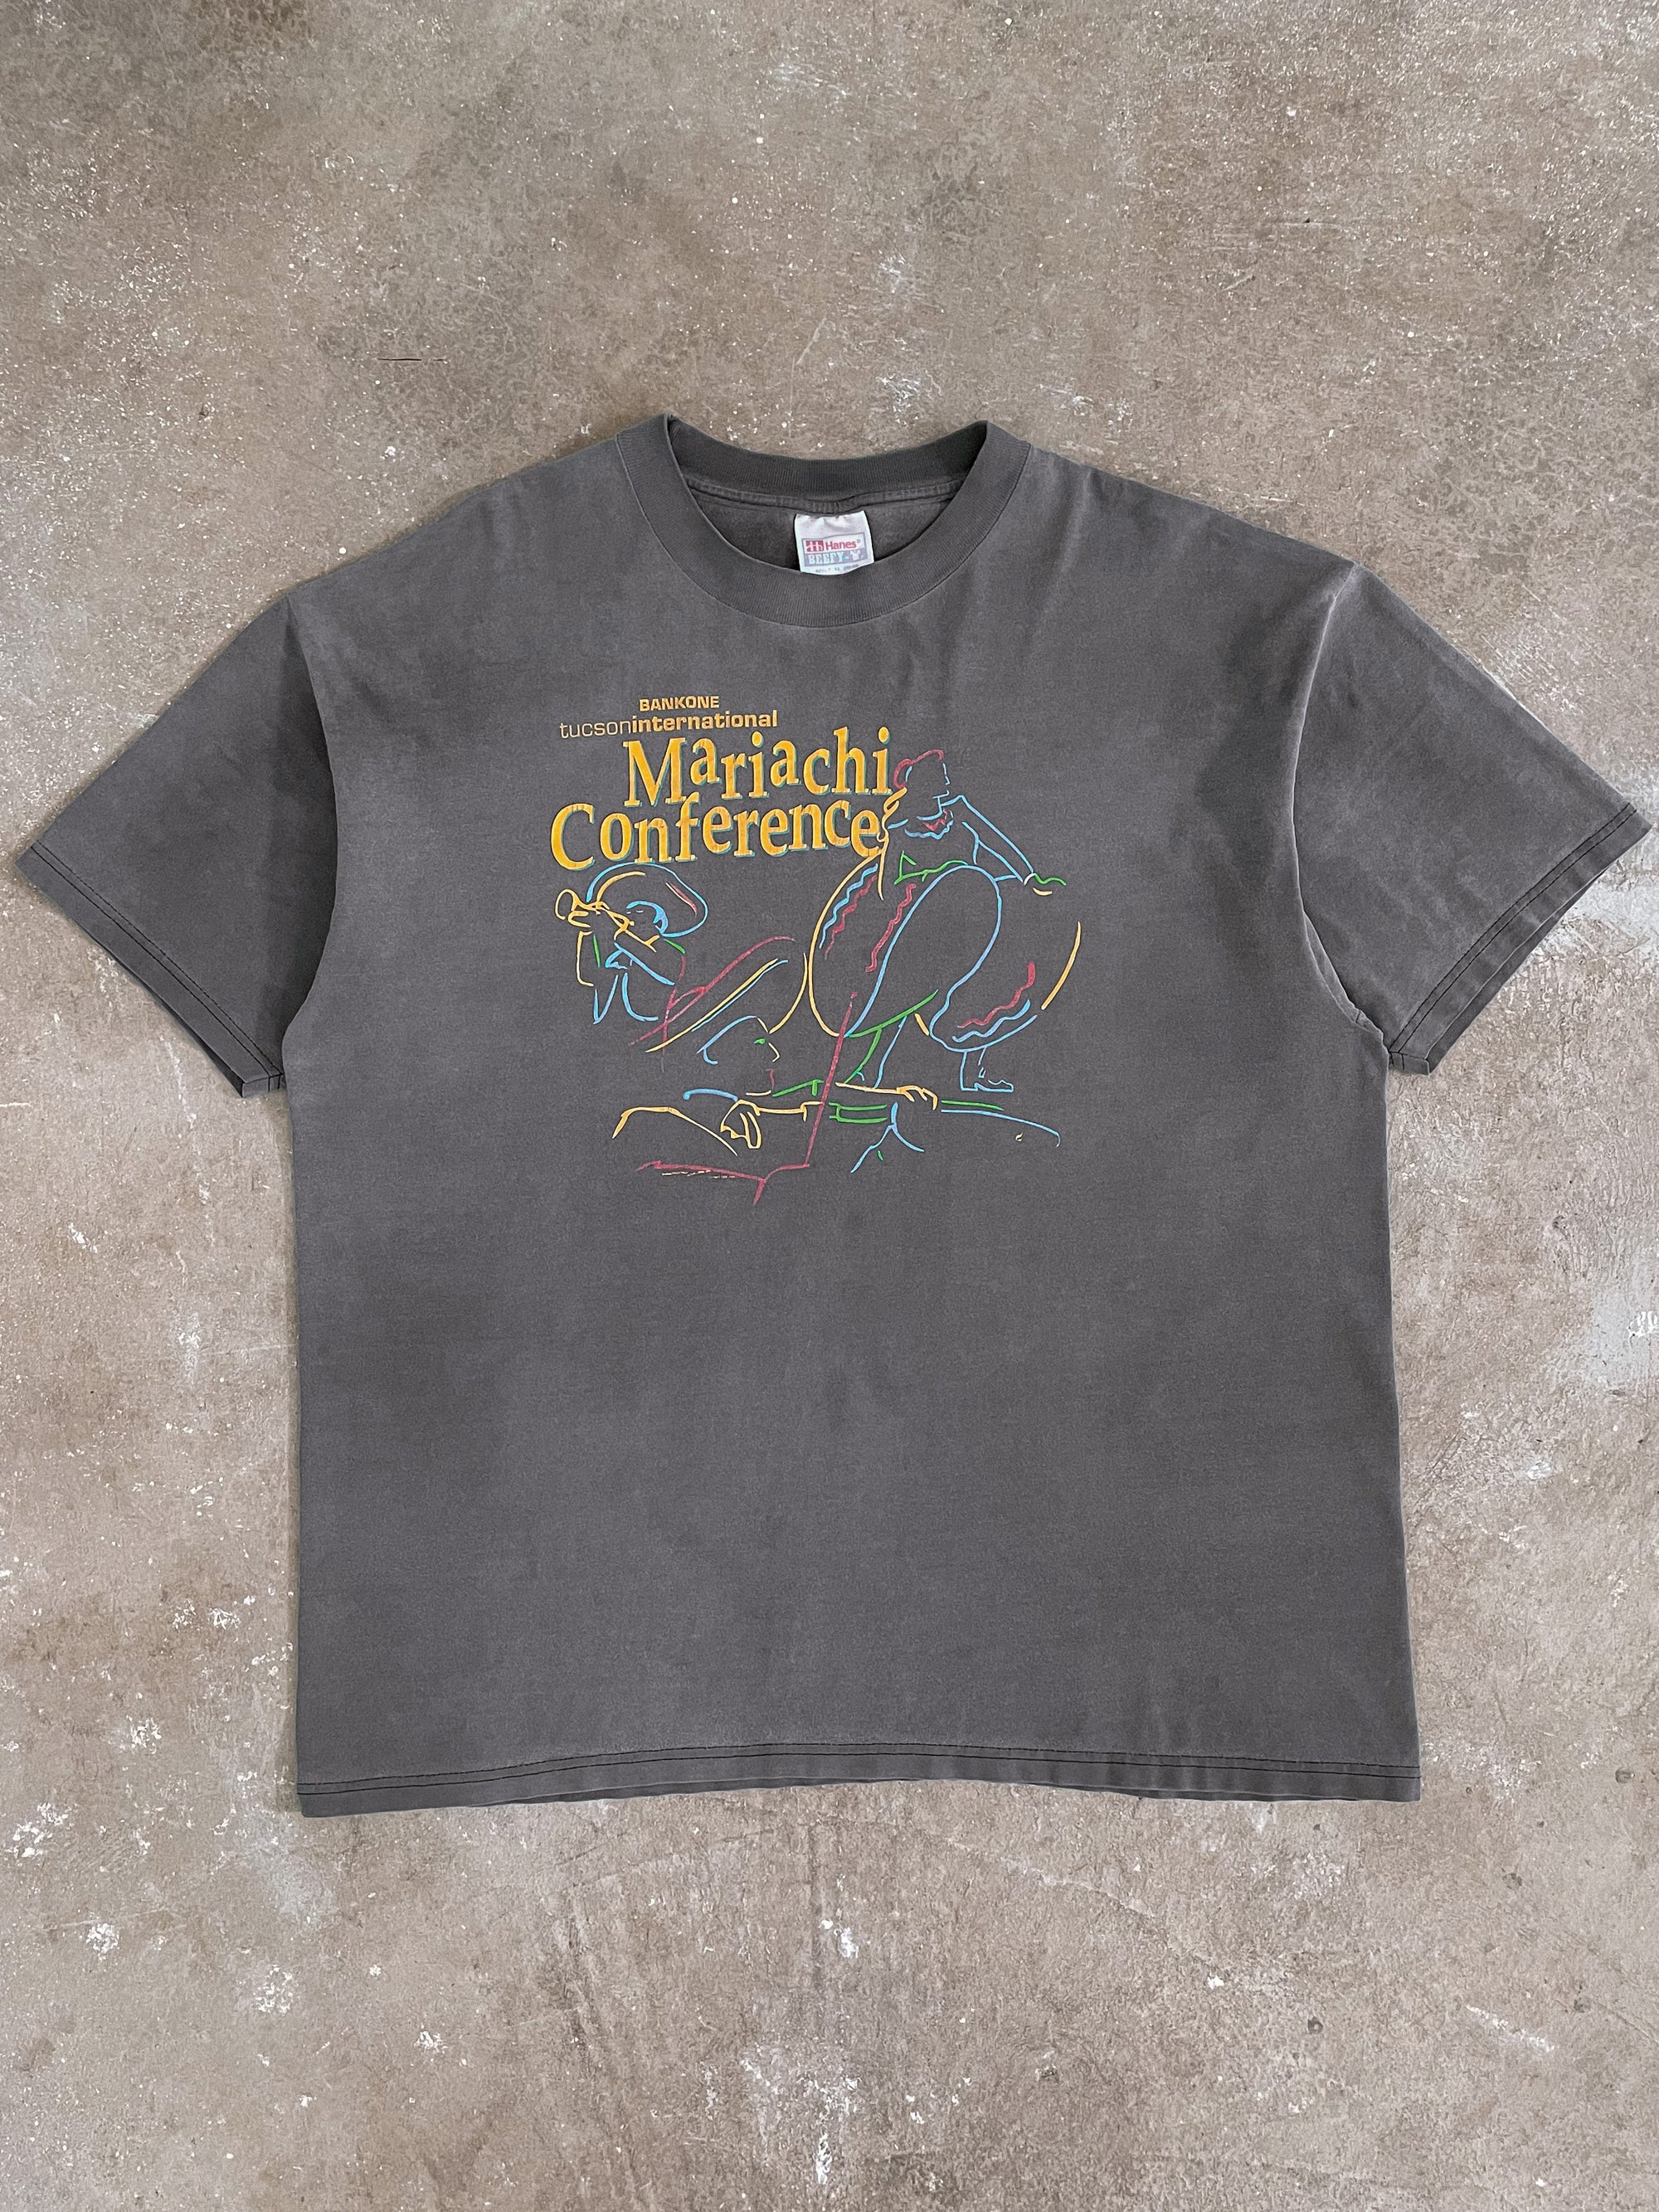 1990s “Mariachi Conference” Sun Faded Tee (XL)